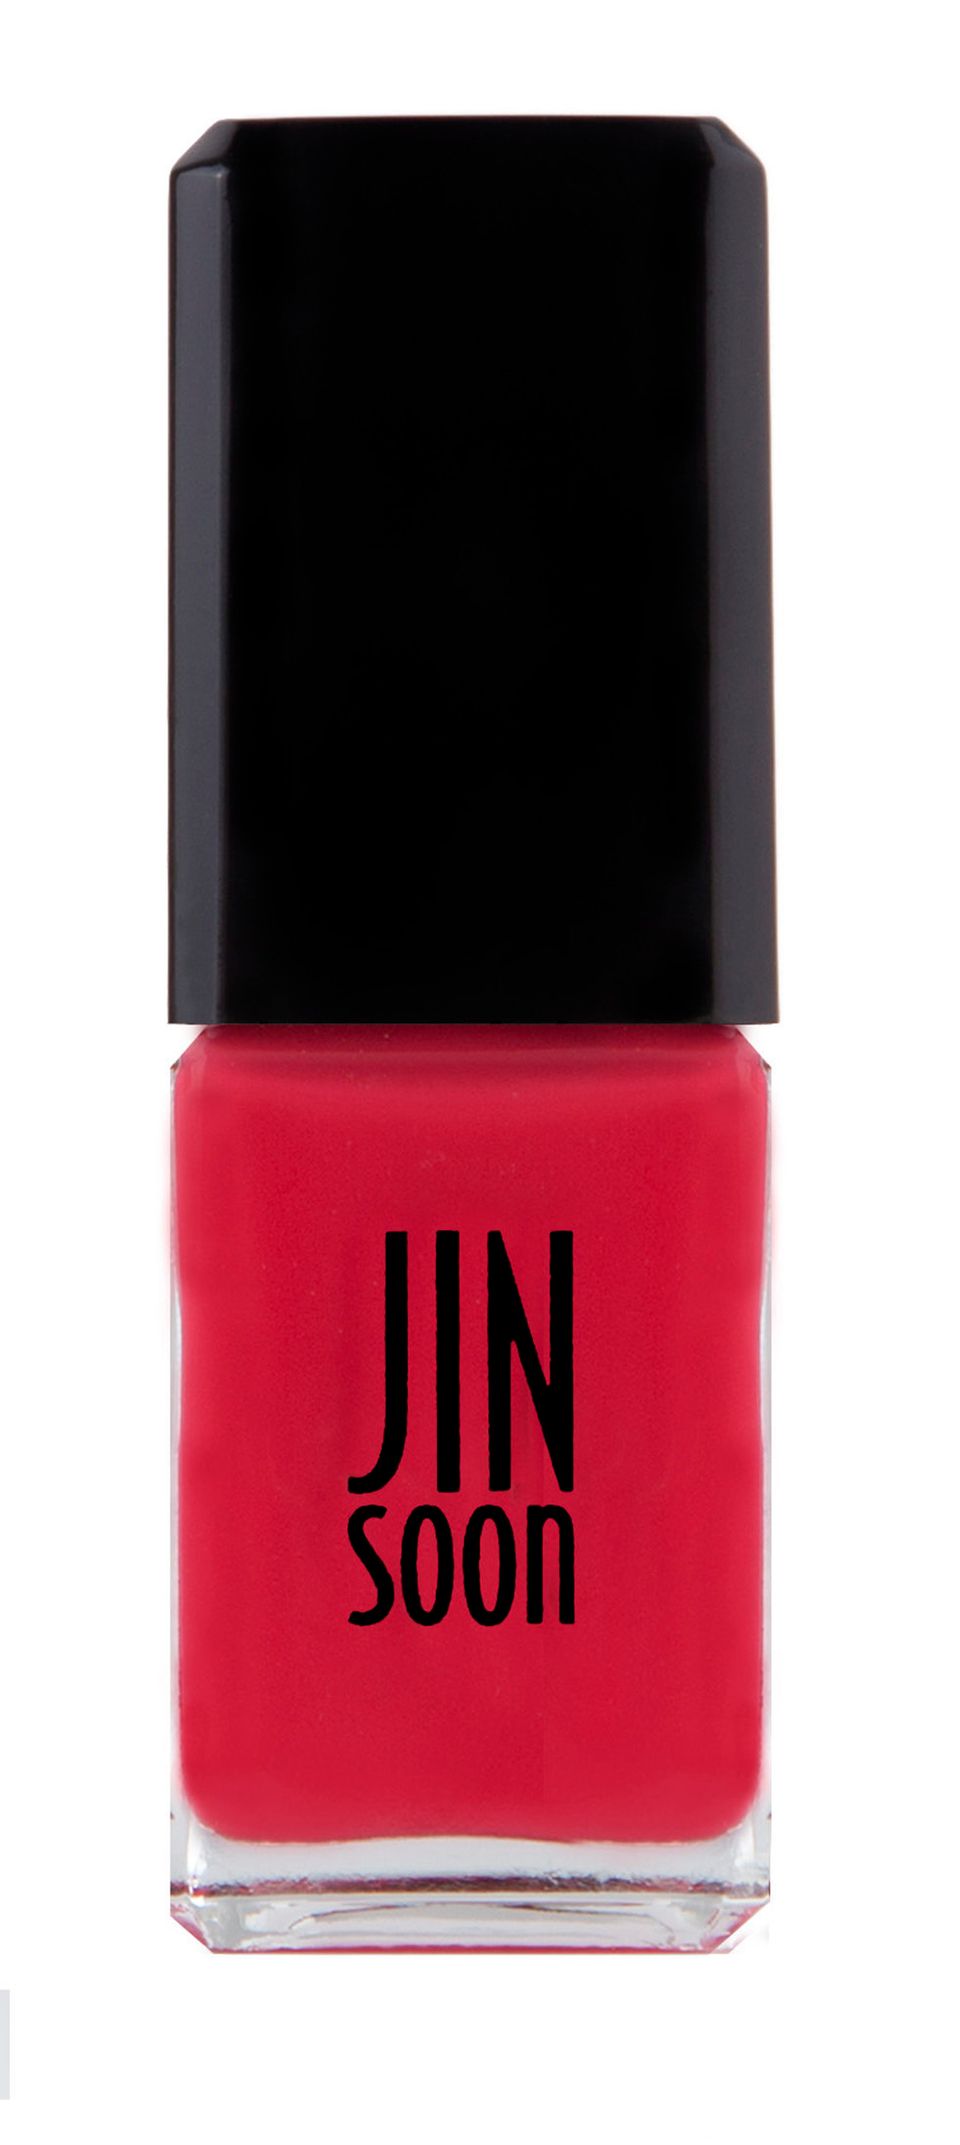 Jin Soon Botanical Flowers Collection Nail Polish in Coral Peony, $18